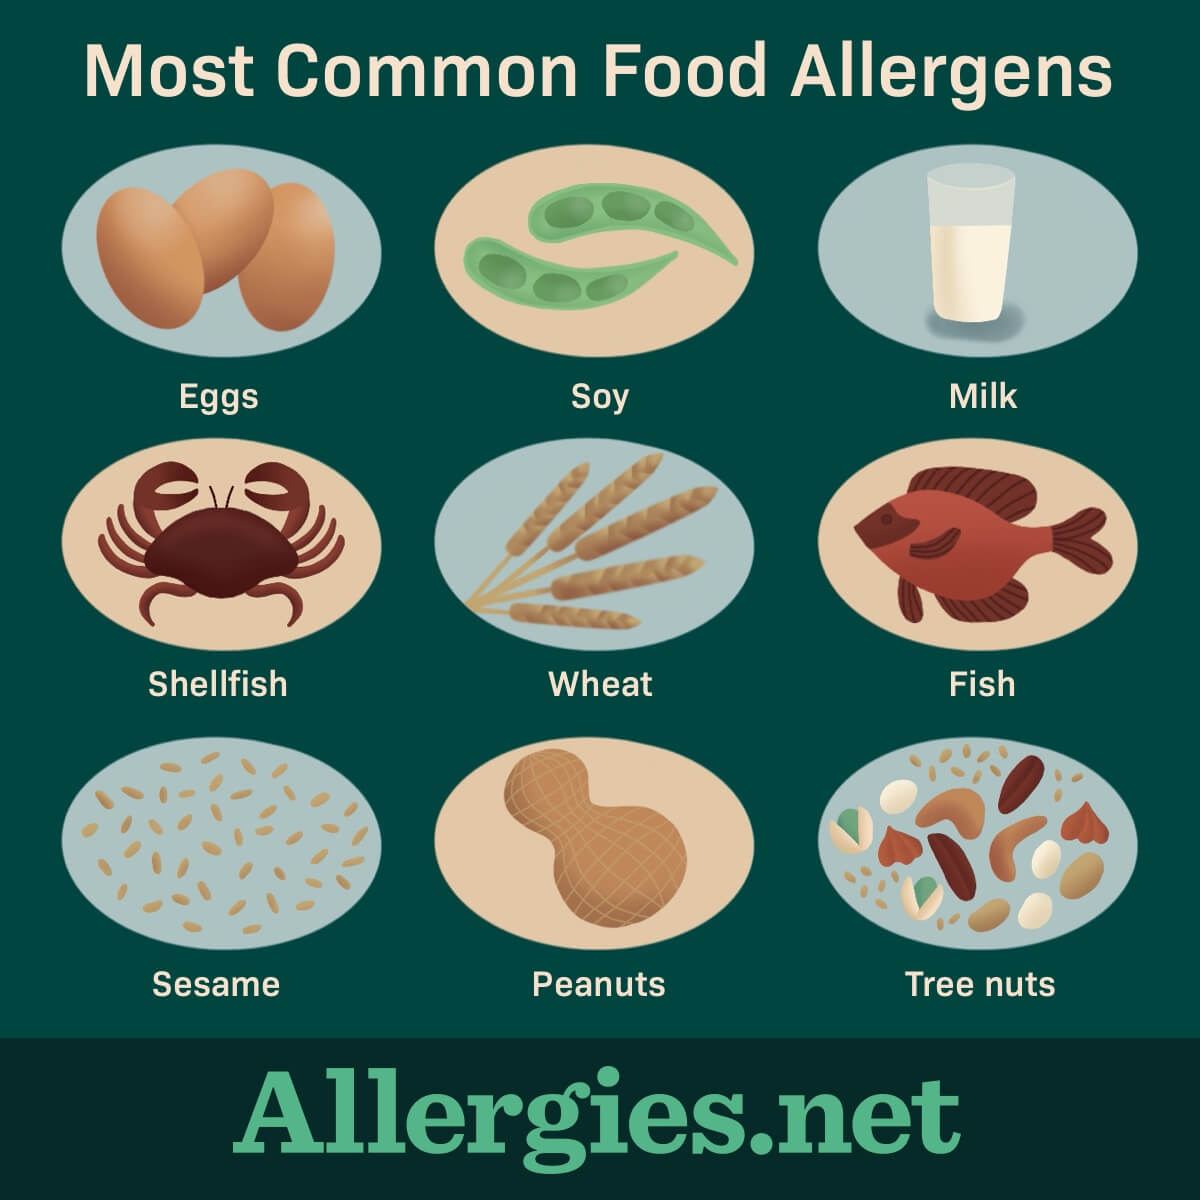 Nine foods cause the most allergic reactions, including eggs, milk products, peanuts, tree nuts, fish, shellfish, wheat, soy, and sesame.